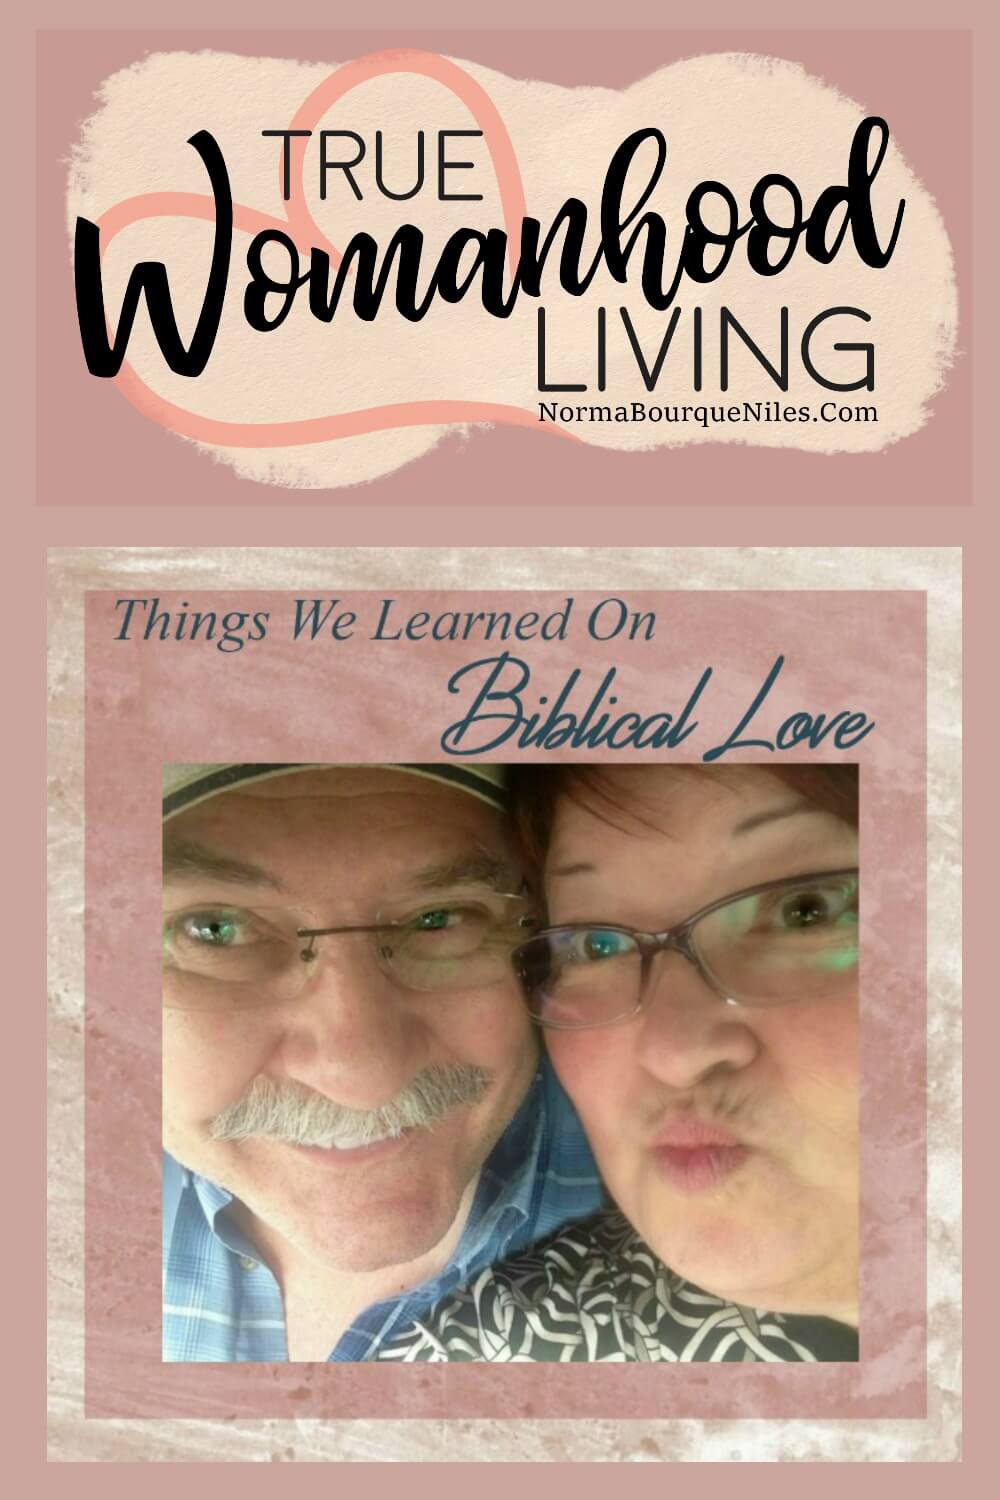 Things We Learned on Biblical Love And Marriage